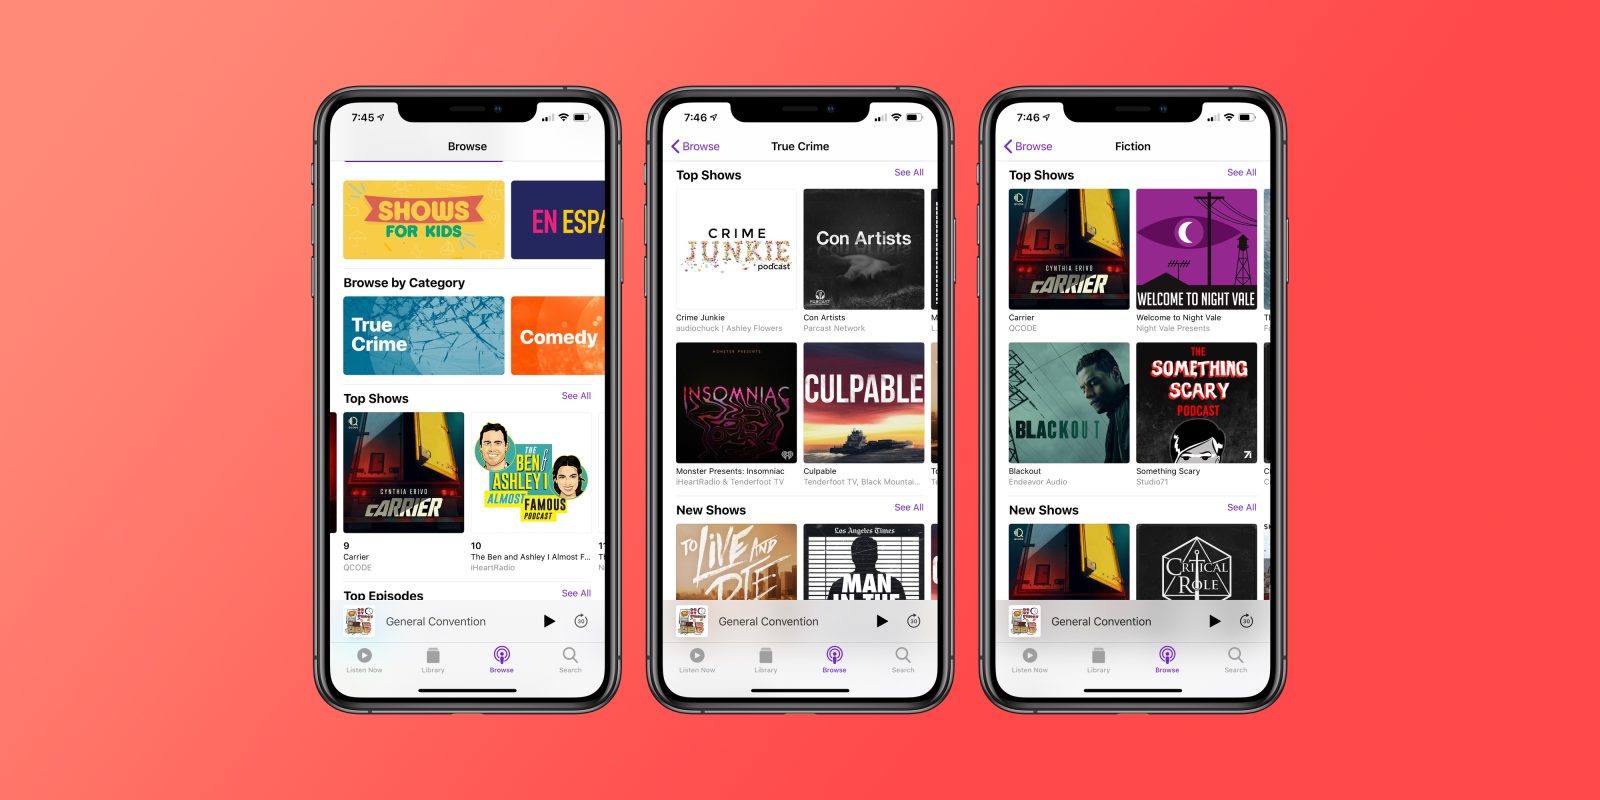 apple podcasts